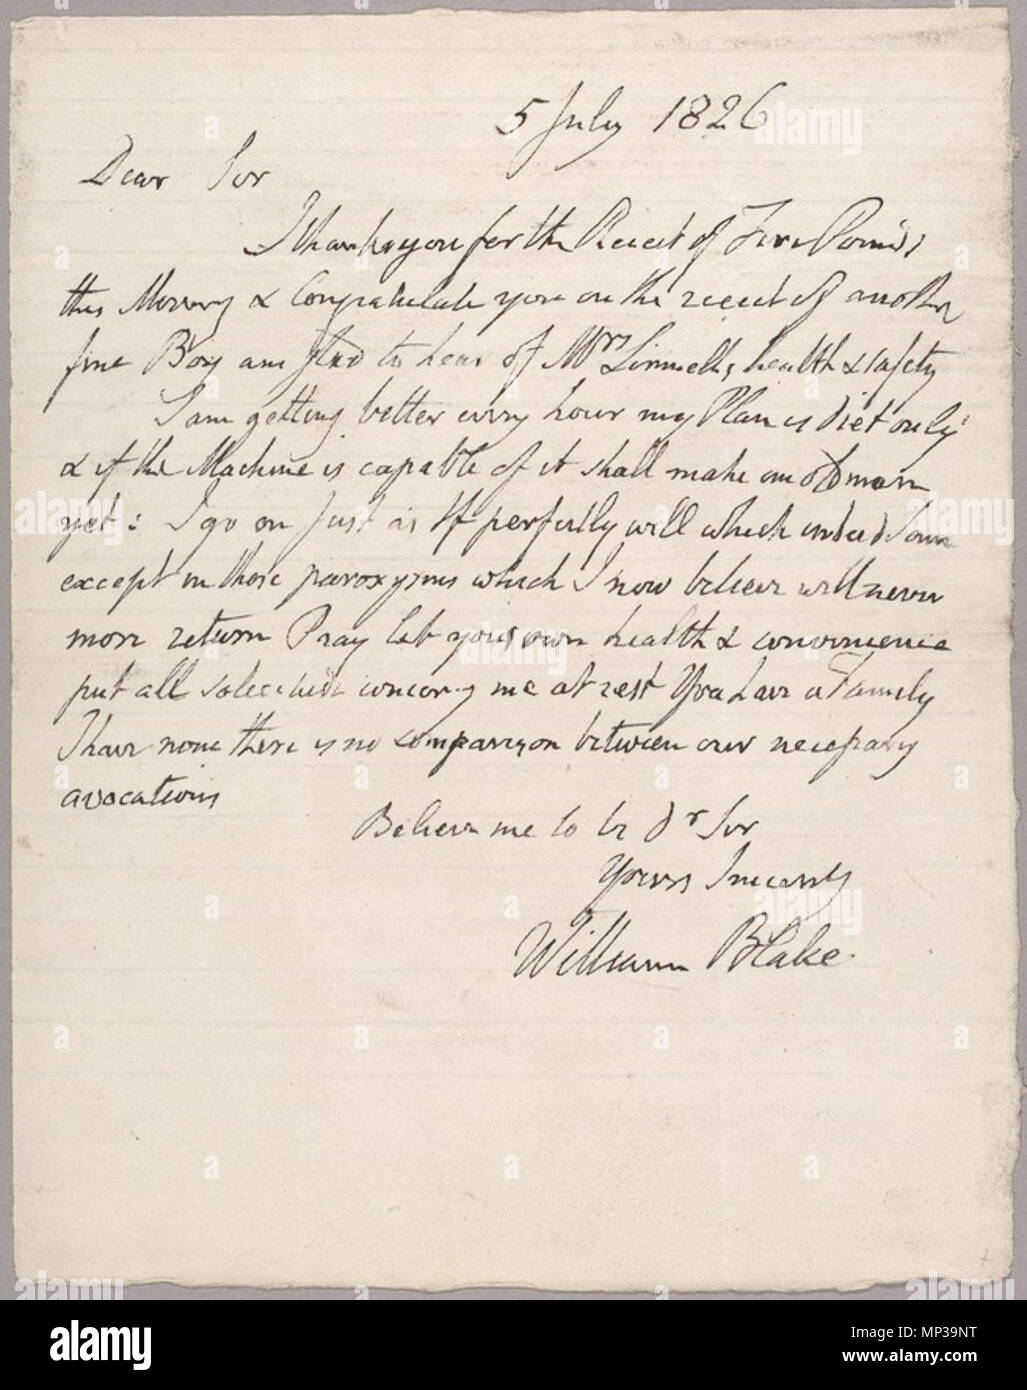 . English: Letter to John Linnell, 5 July 1826, object 2 . 17 November 2010, 07:04:34.   William Blake  (1757–1827)       Alternative names W. Blake; Uil'iam Bleik  Description British painter, poet, writer, theologian, collector and engraver  Date of birth/death 28 November 1757 12 August 1827  Location of birth/death Broadwick Street Charing Cross  Work location London  Authority control  : Q41513 VIAF: 54144439 ISNI: 0000 0001 2096 135X ULAN: 500012489 LCCN: n78095331 NLA: 35019221 WorldCat      The William Blake Archive      Location Digital Collection hosted on servers at UNC Chapel Hill  Stock Photo